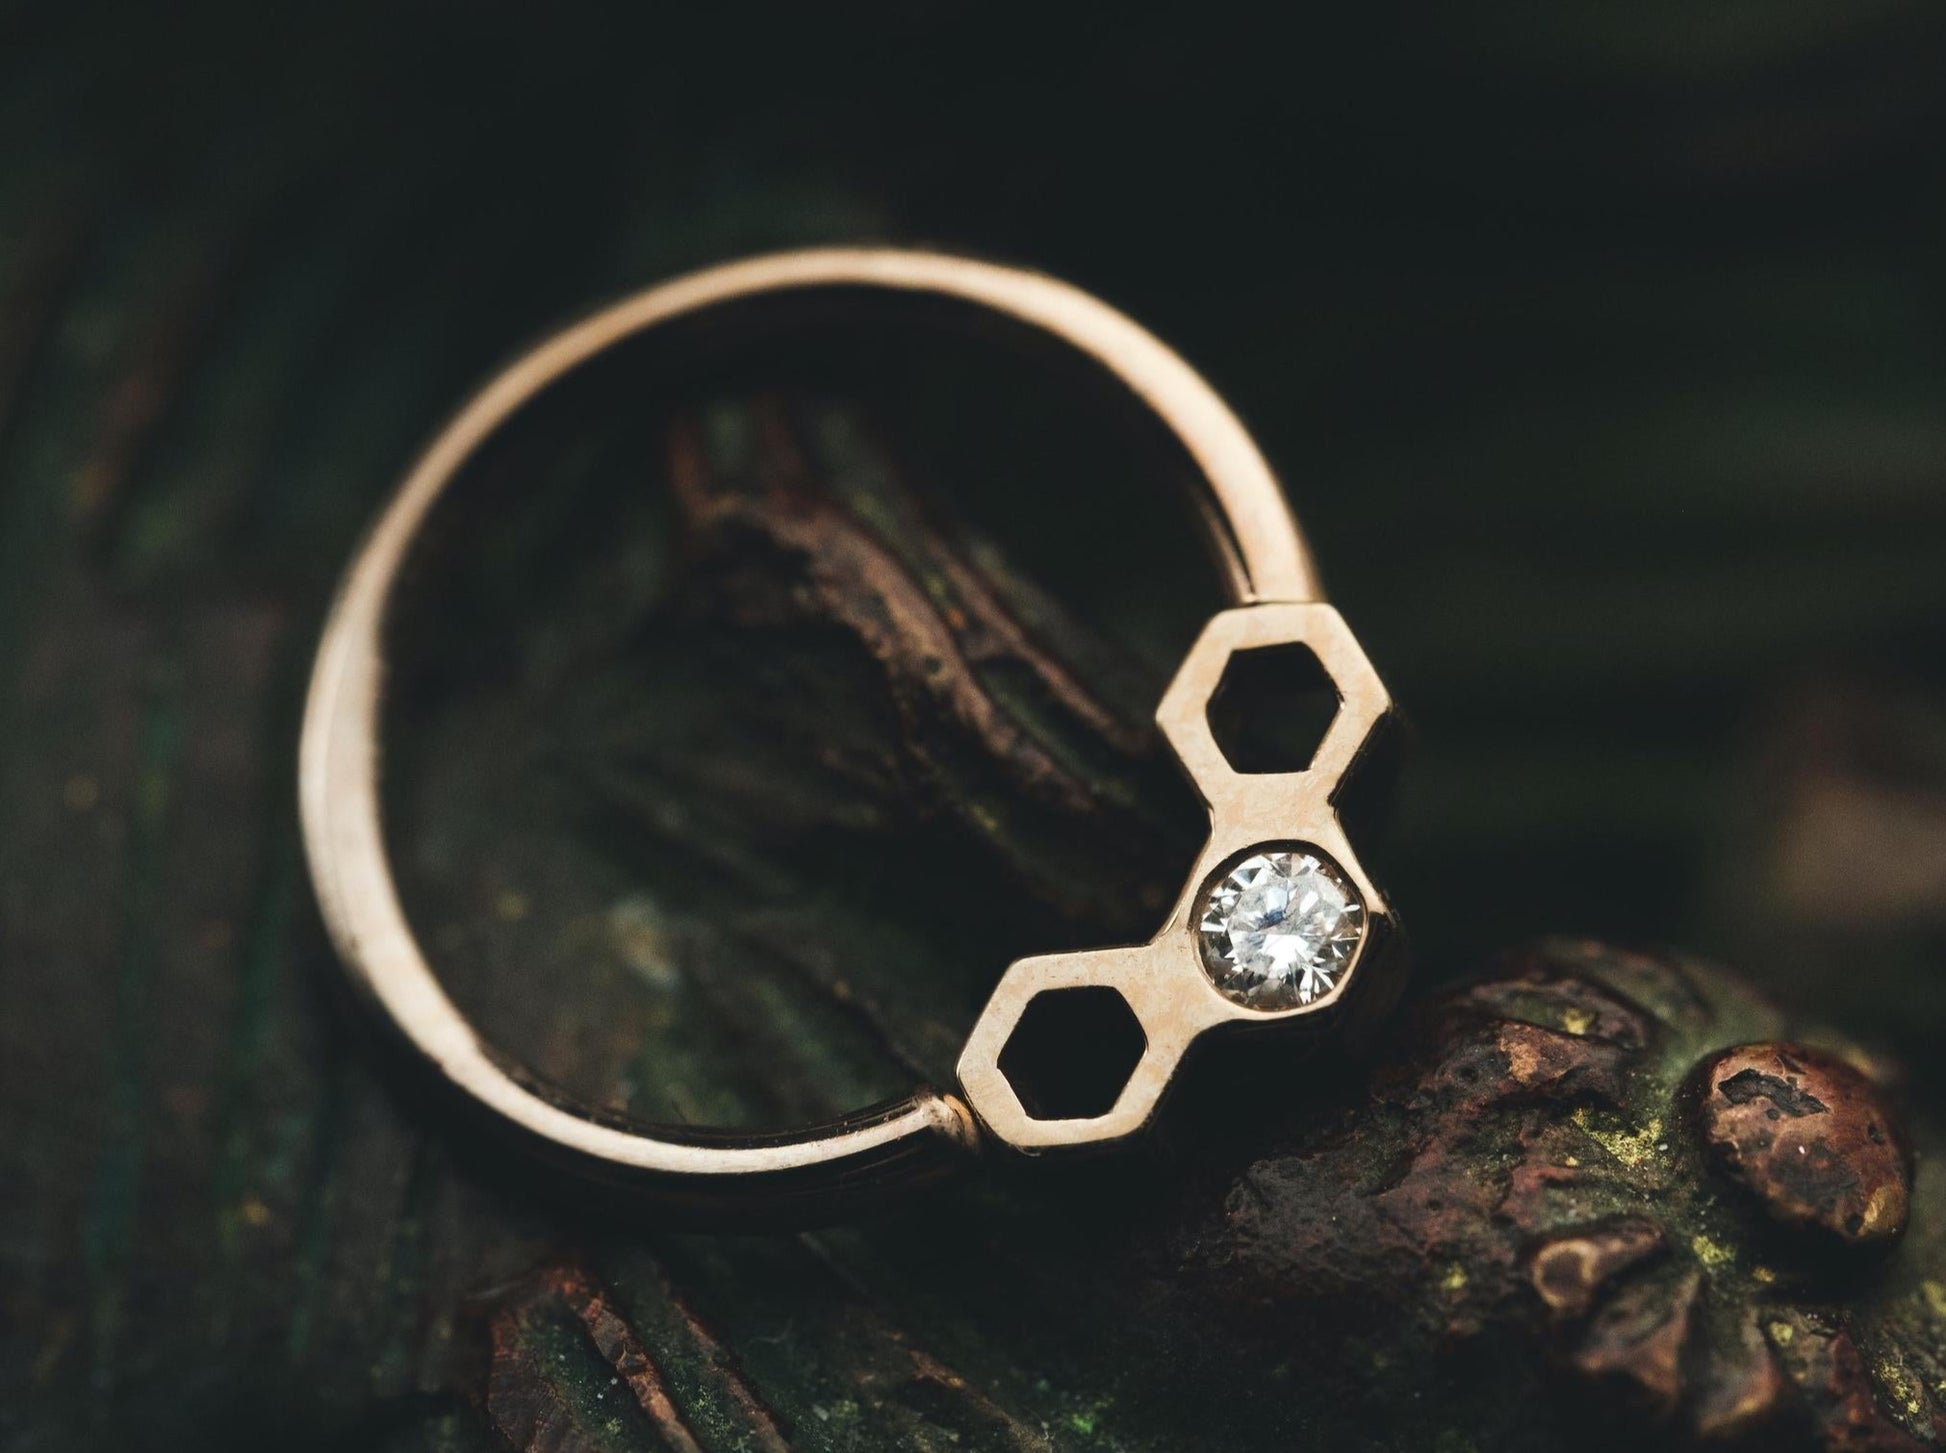 Honeycomb Seam Ring 16g 3/8" with VS Diamond in 14k Rose Gold by BVLA